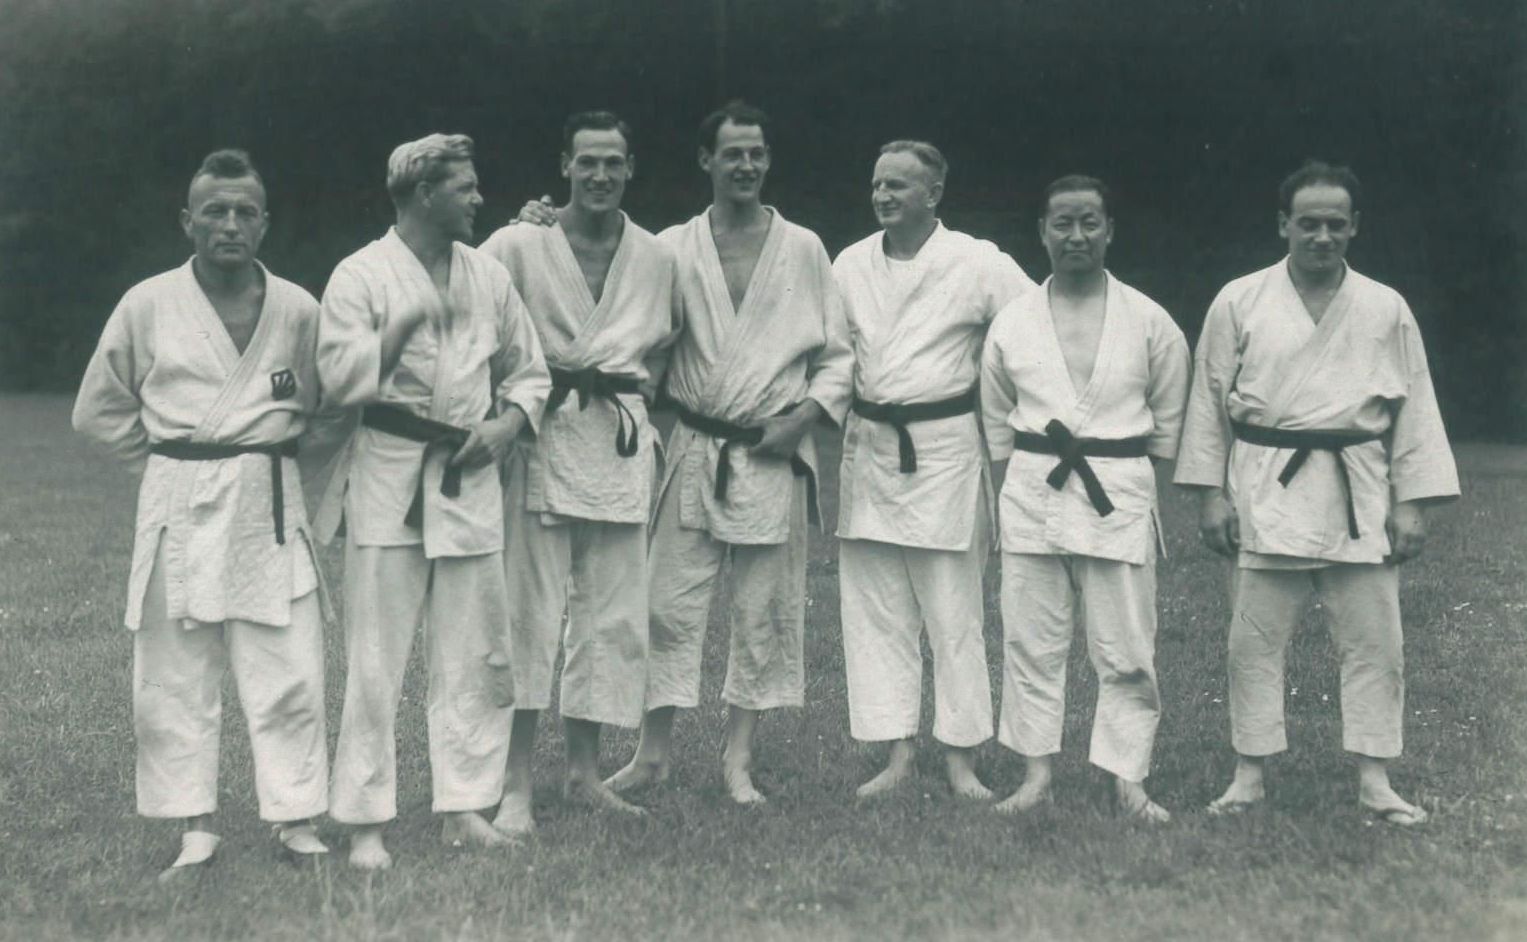 Black and white photograph showing from left to right Otto Schmelzeisen, Max Hoppe, Norman Hyde, Harold Hyde, Alfred Rhode, Hanho Rhi and Tibor Vincent at a judo summer school in Frankfurt, Germany, 1939.